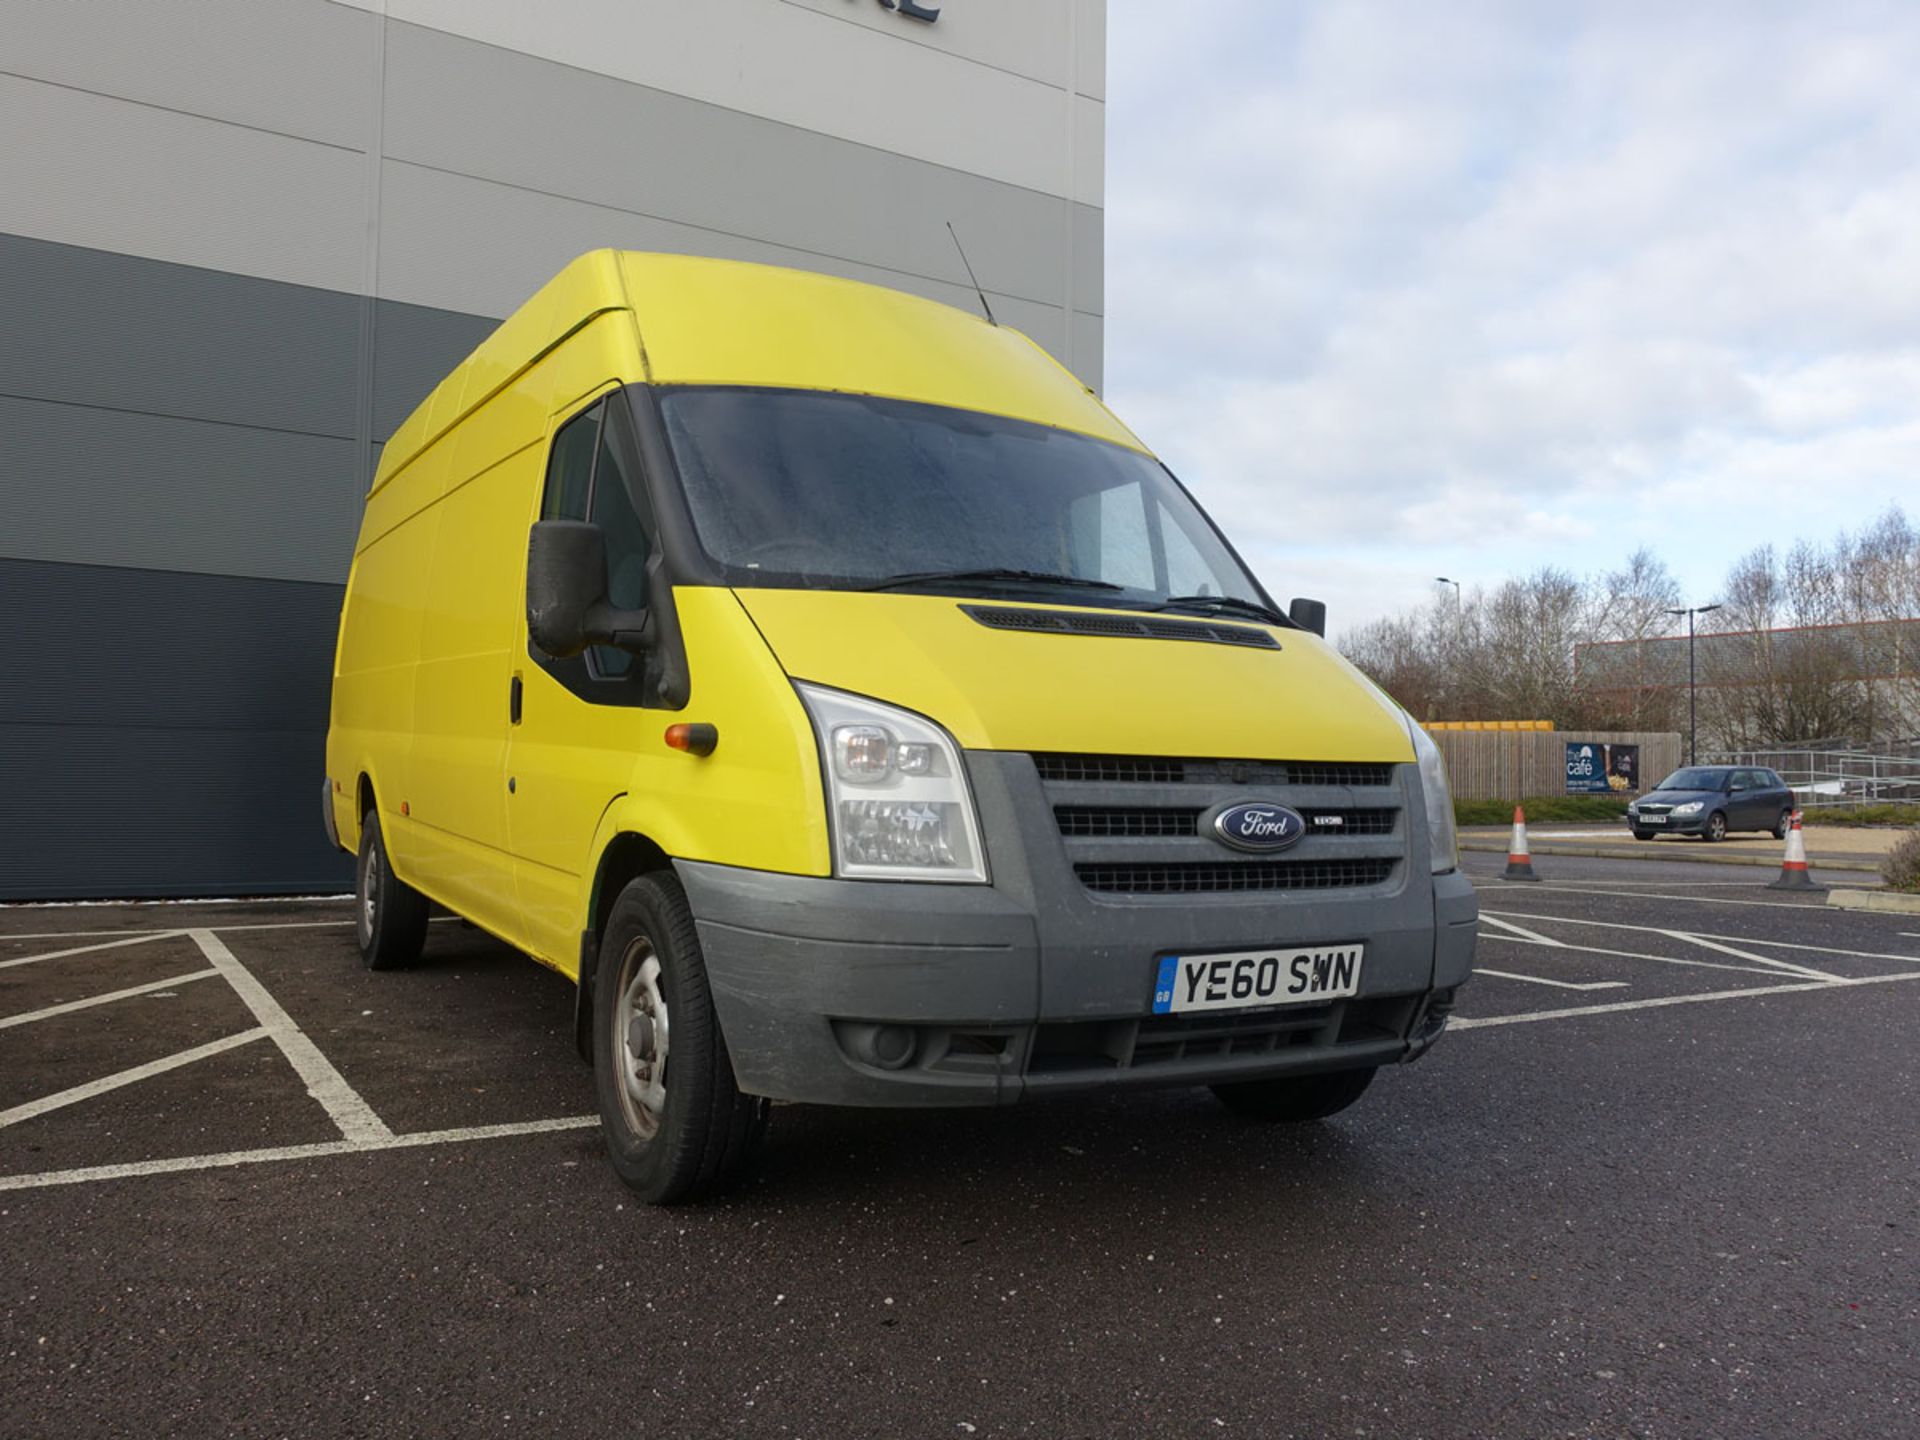 2010 Ford Transit Panel Van in yellow, 2402cc, key and V5 present, first registered 26,11,2010, 3